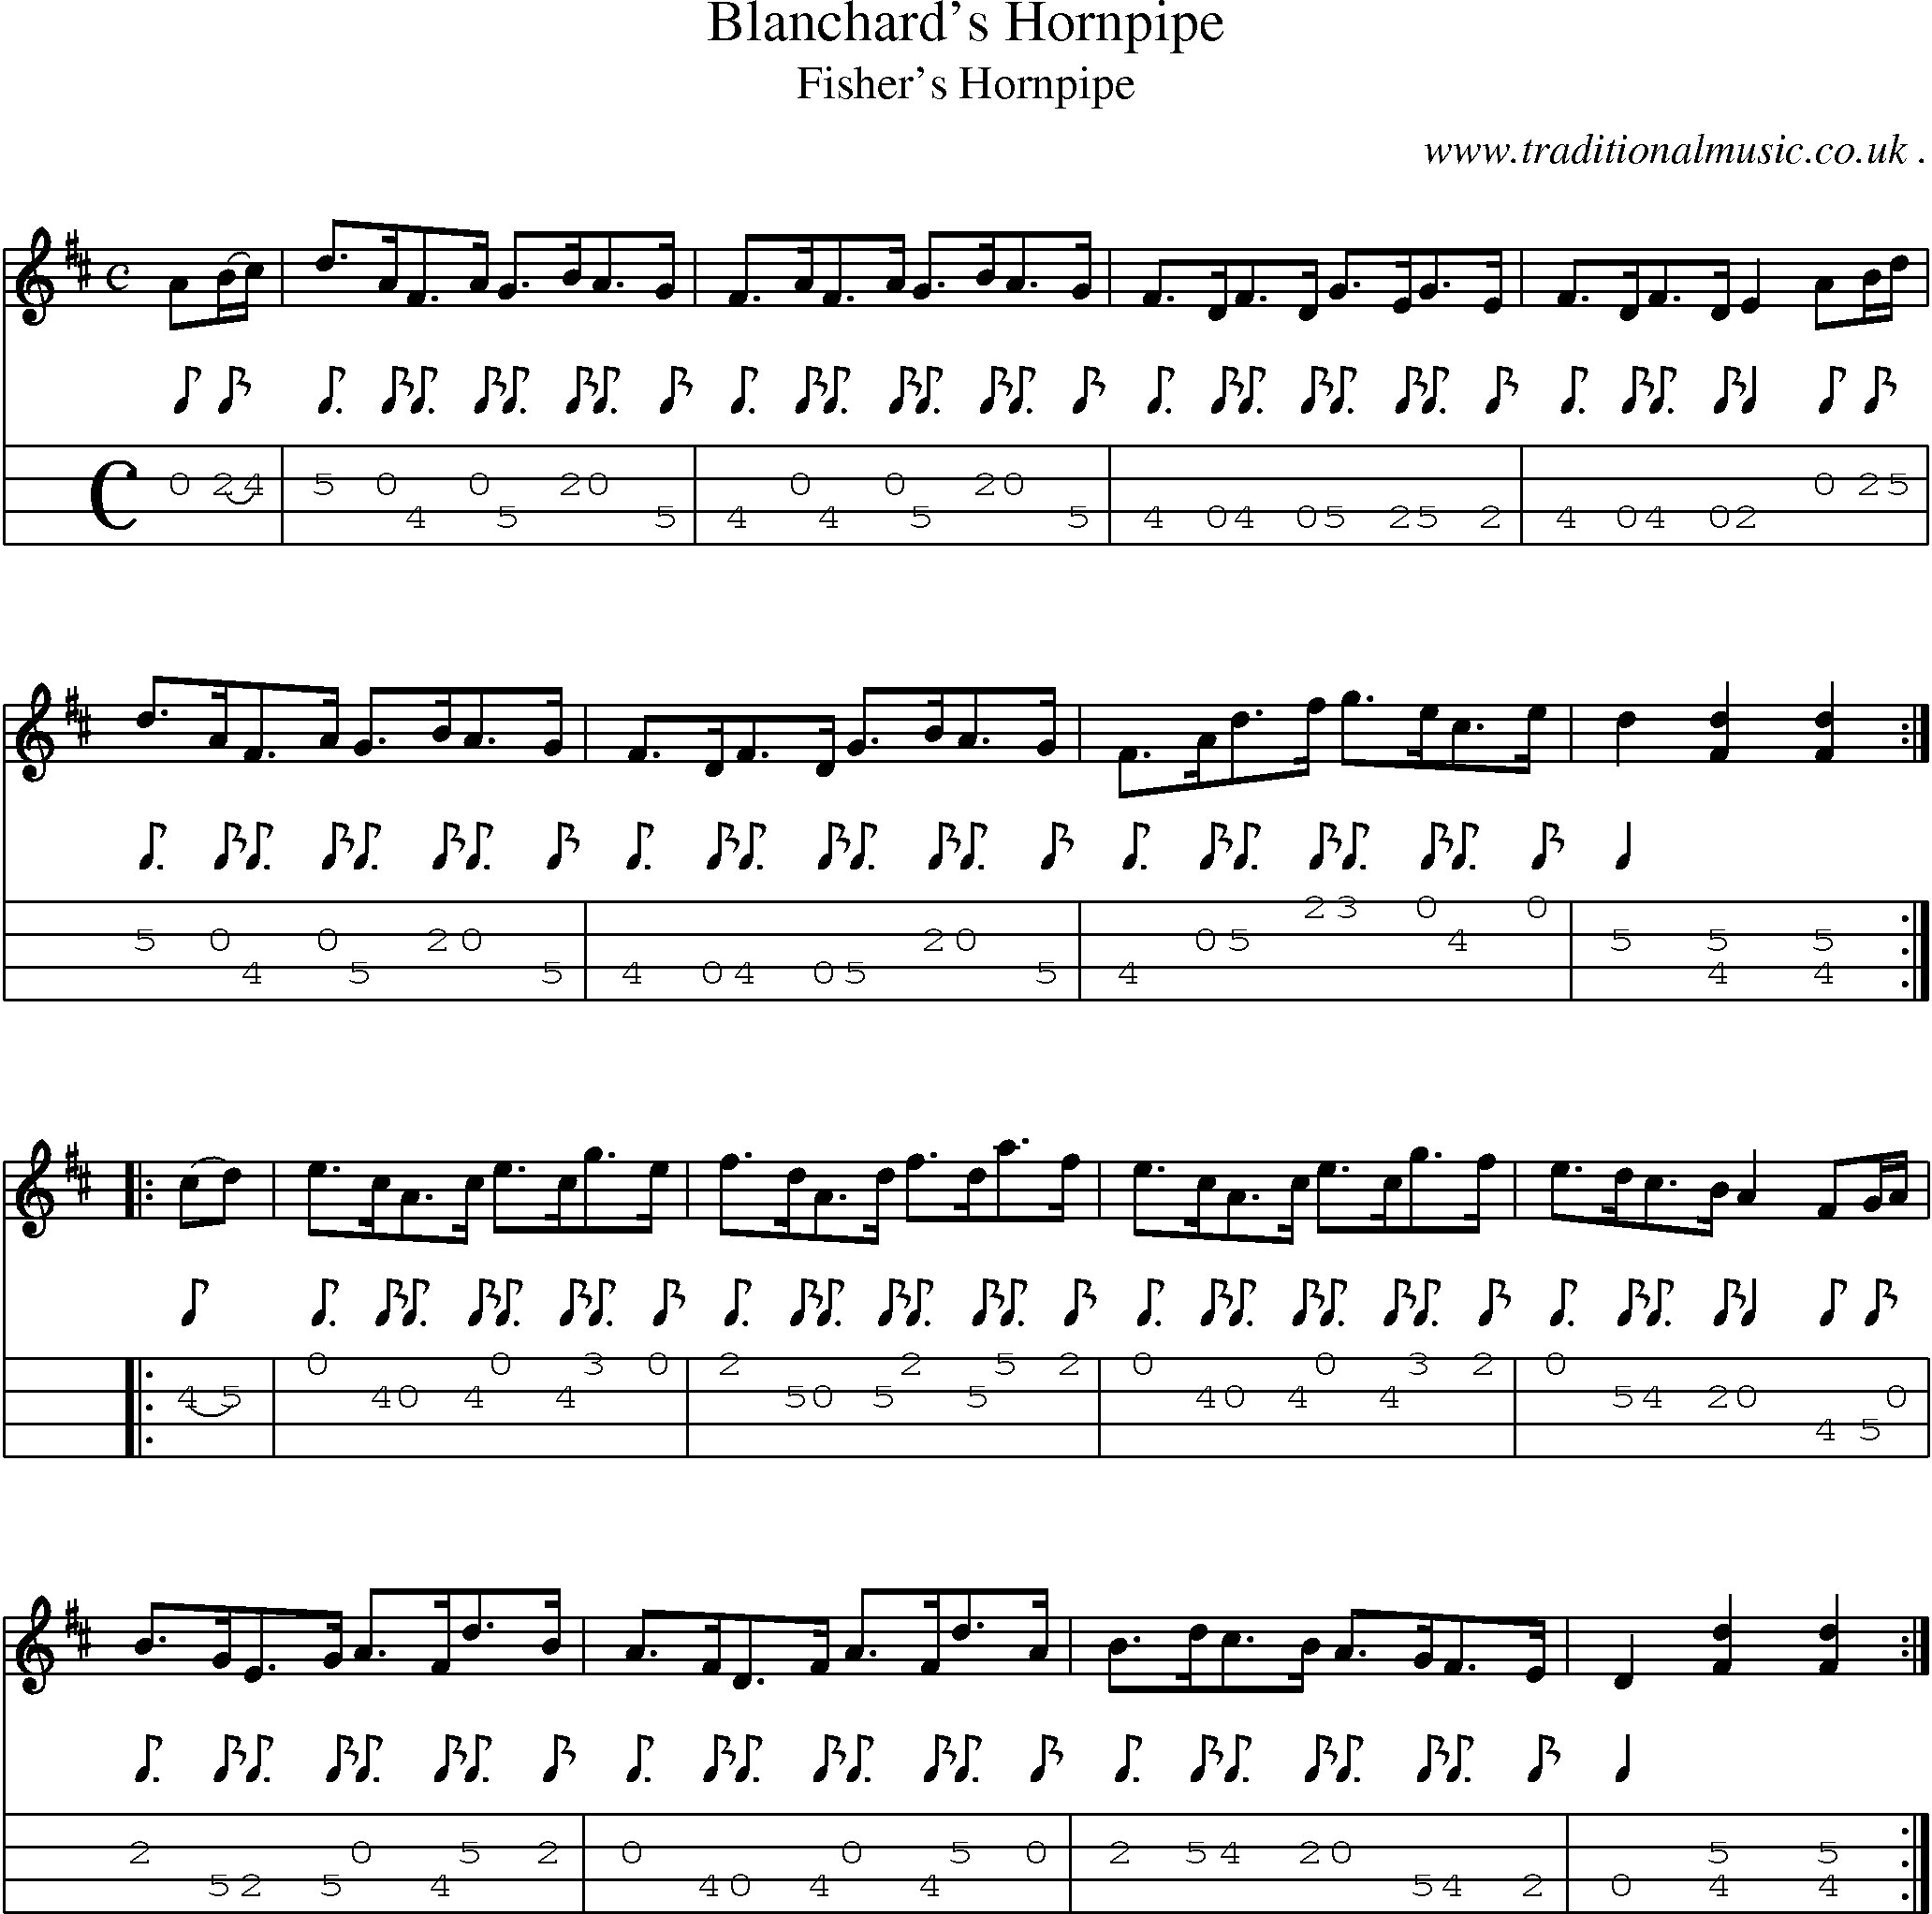 Sheet-music  score, Chords and Mandolin Tabs for Blanchards Hornpipe